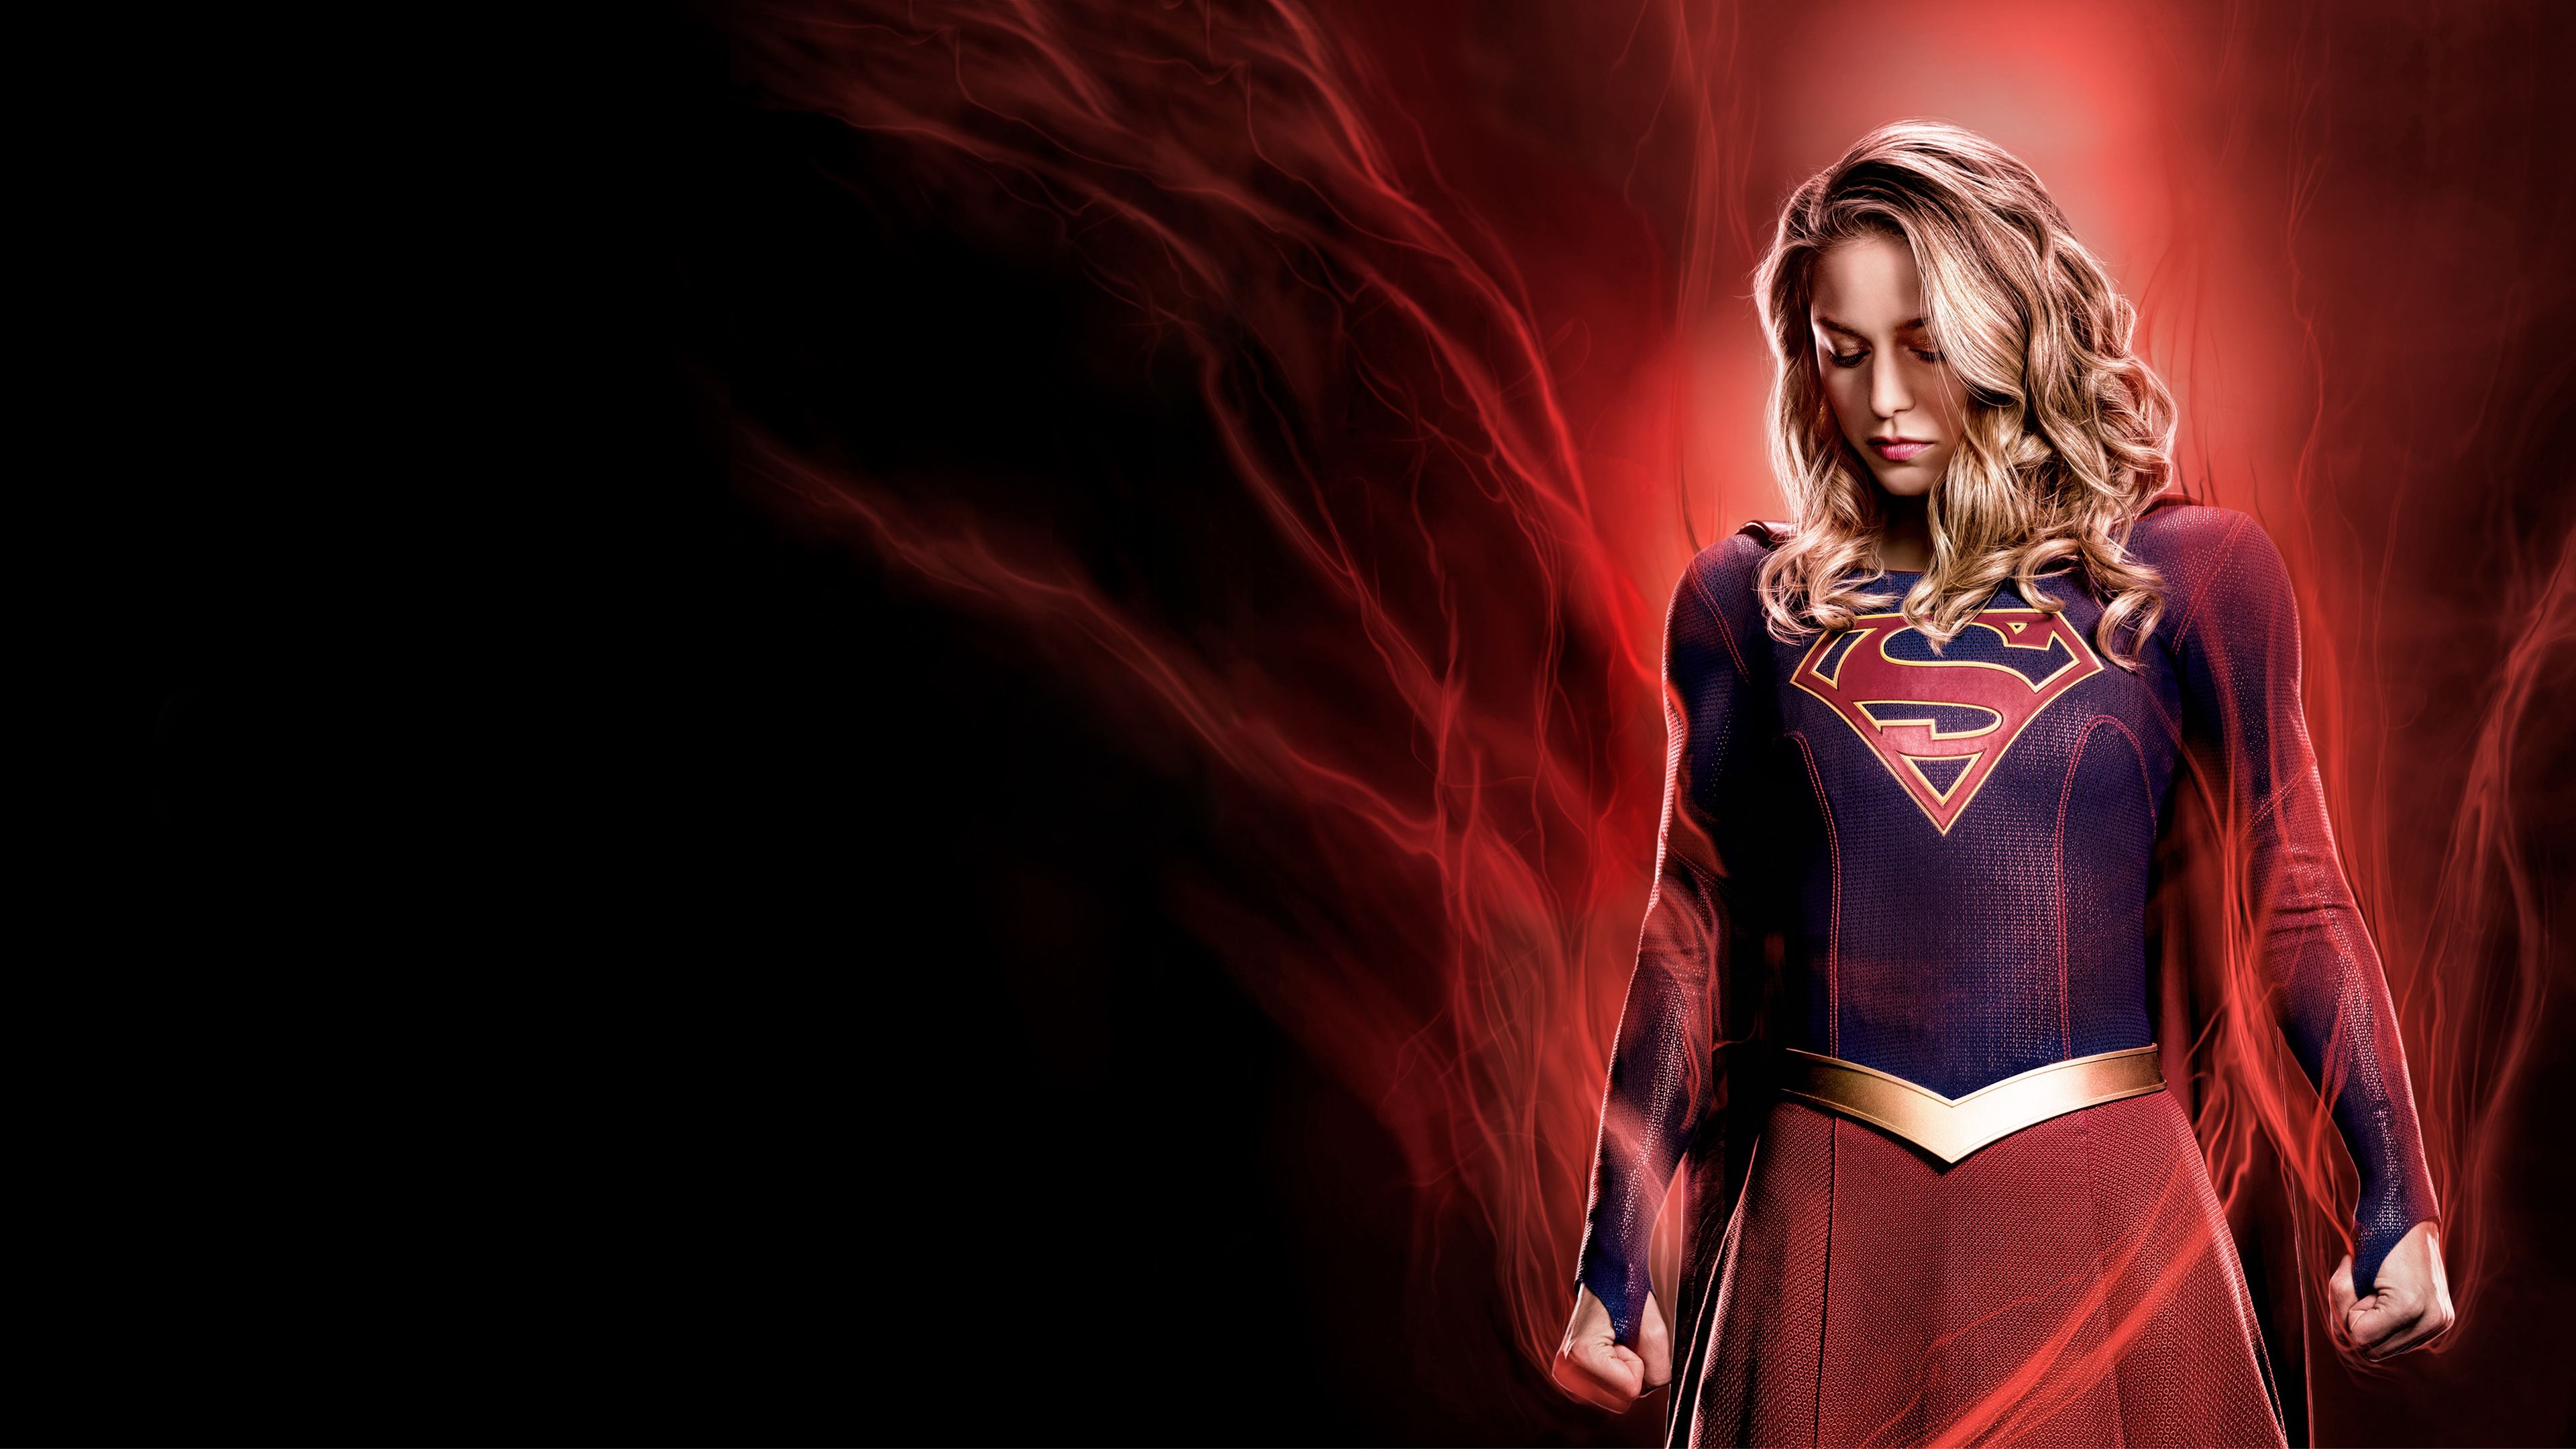 Supergirl Tv Series 4k Poster, HD Tv Shows, 4k Wallpapers, Image, Backgroun...